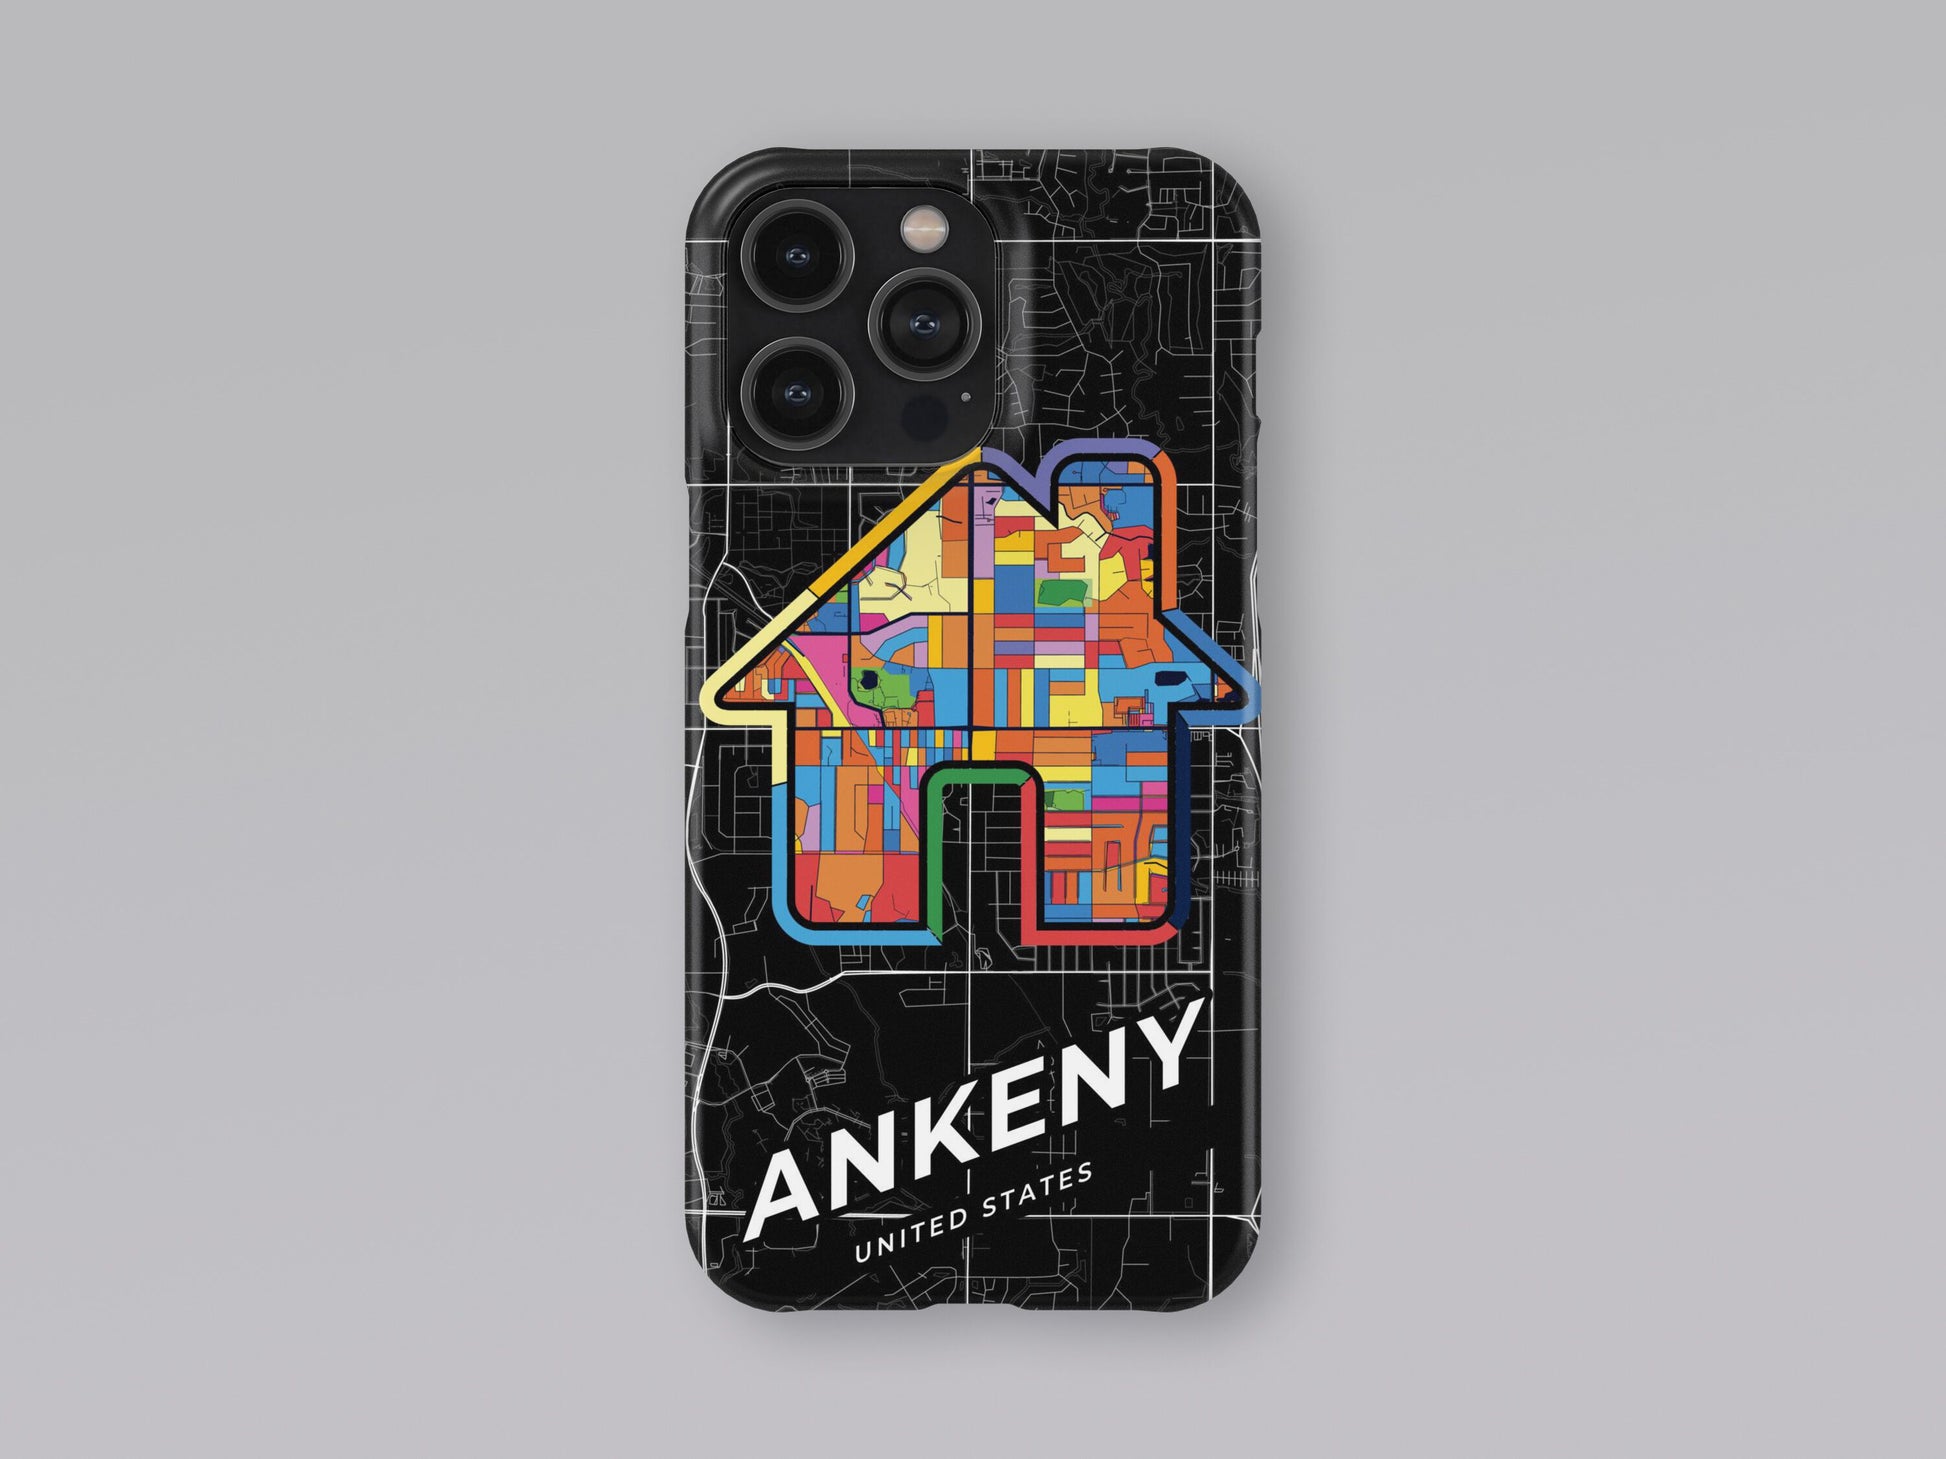 Ankeny Iowa slim phone case with colorful icon. Birthday, wedding or housewarming gift. Couple match cases. 3